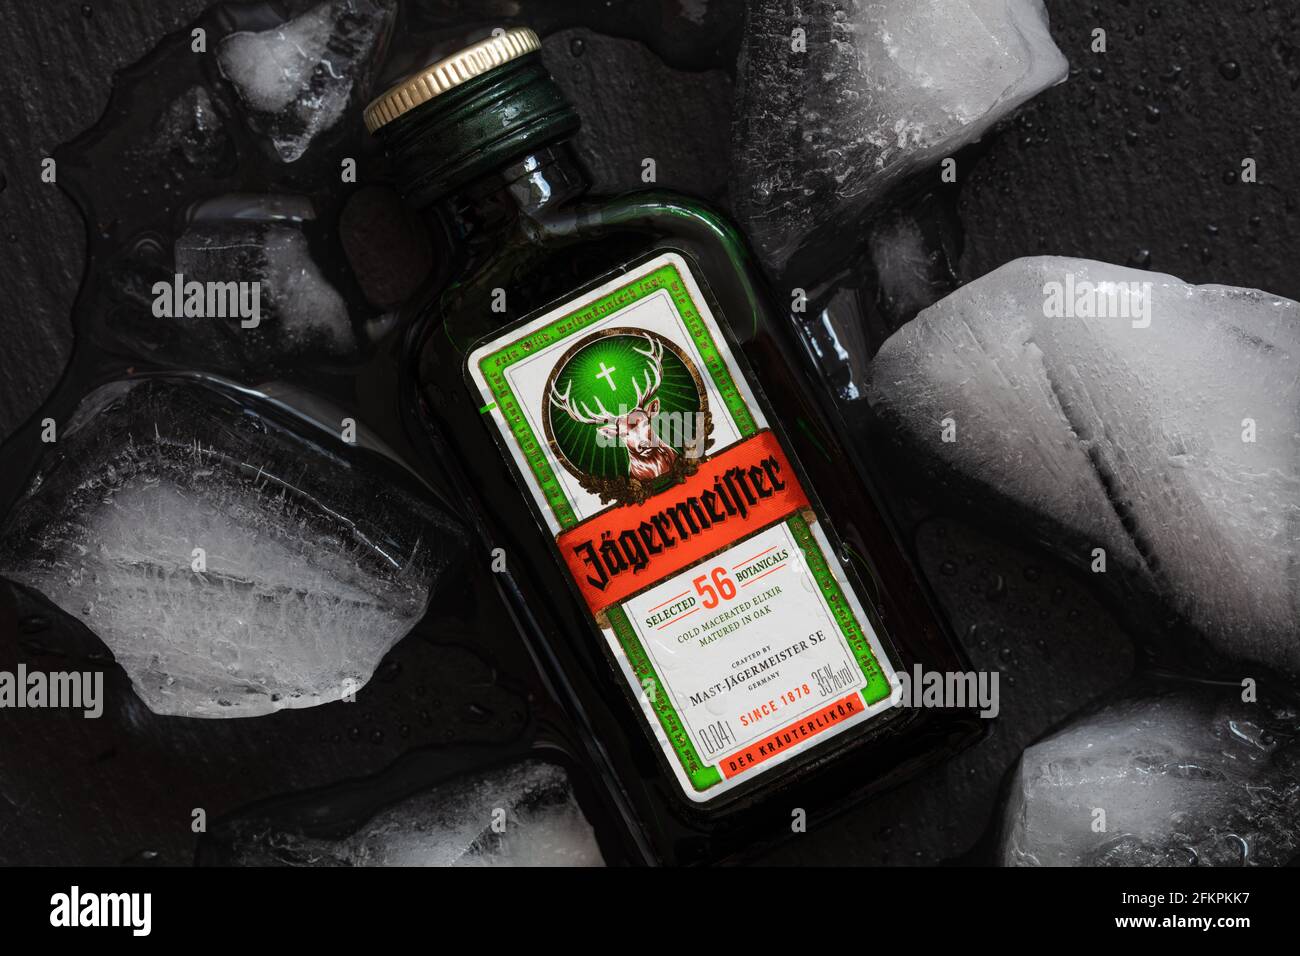 Bottle of Jagermeister alcohol drink, German digestif made with 56 herbs  and spices Stock Photo - Alamy